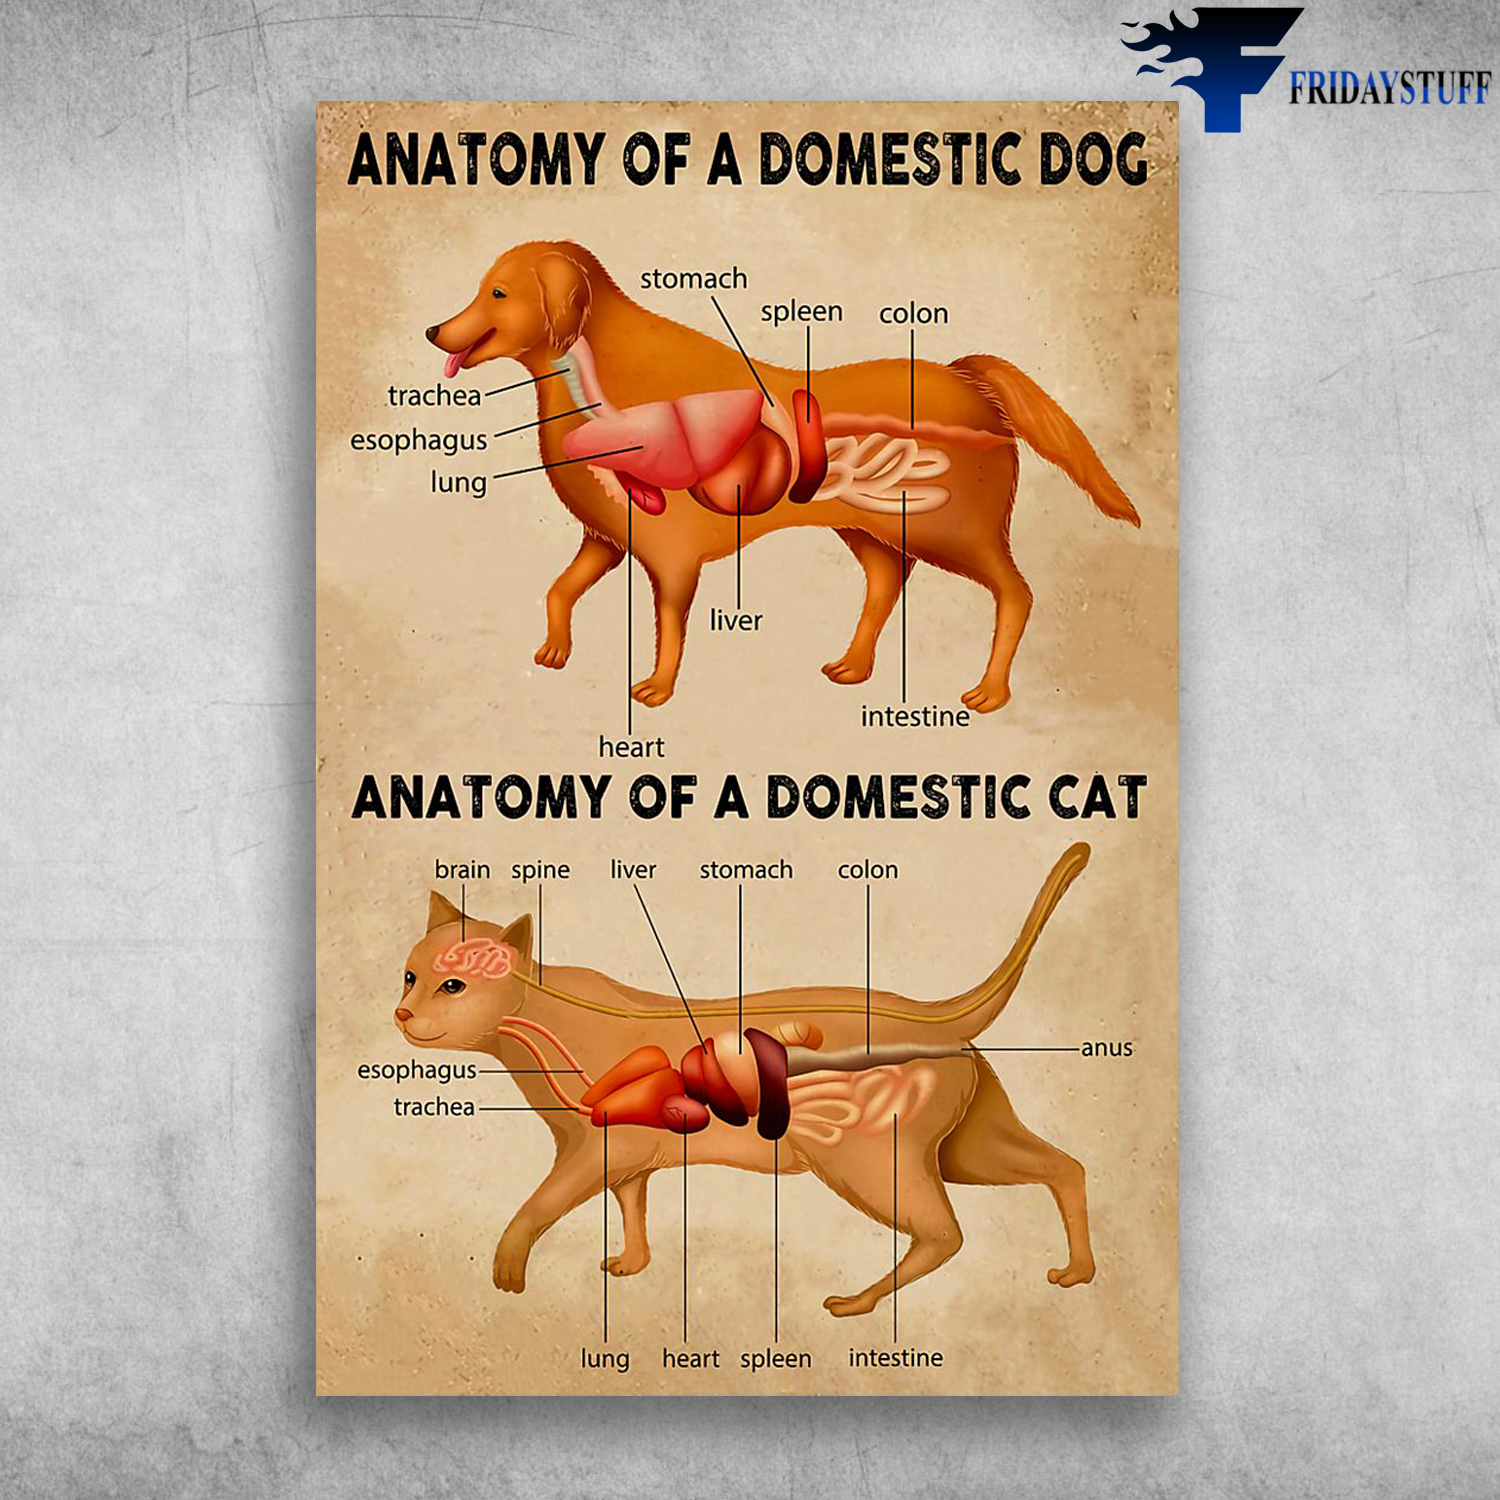 Anatomy Of A Domestic Dog And Anatomy Of A Domestic Cat